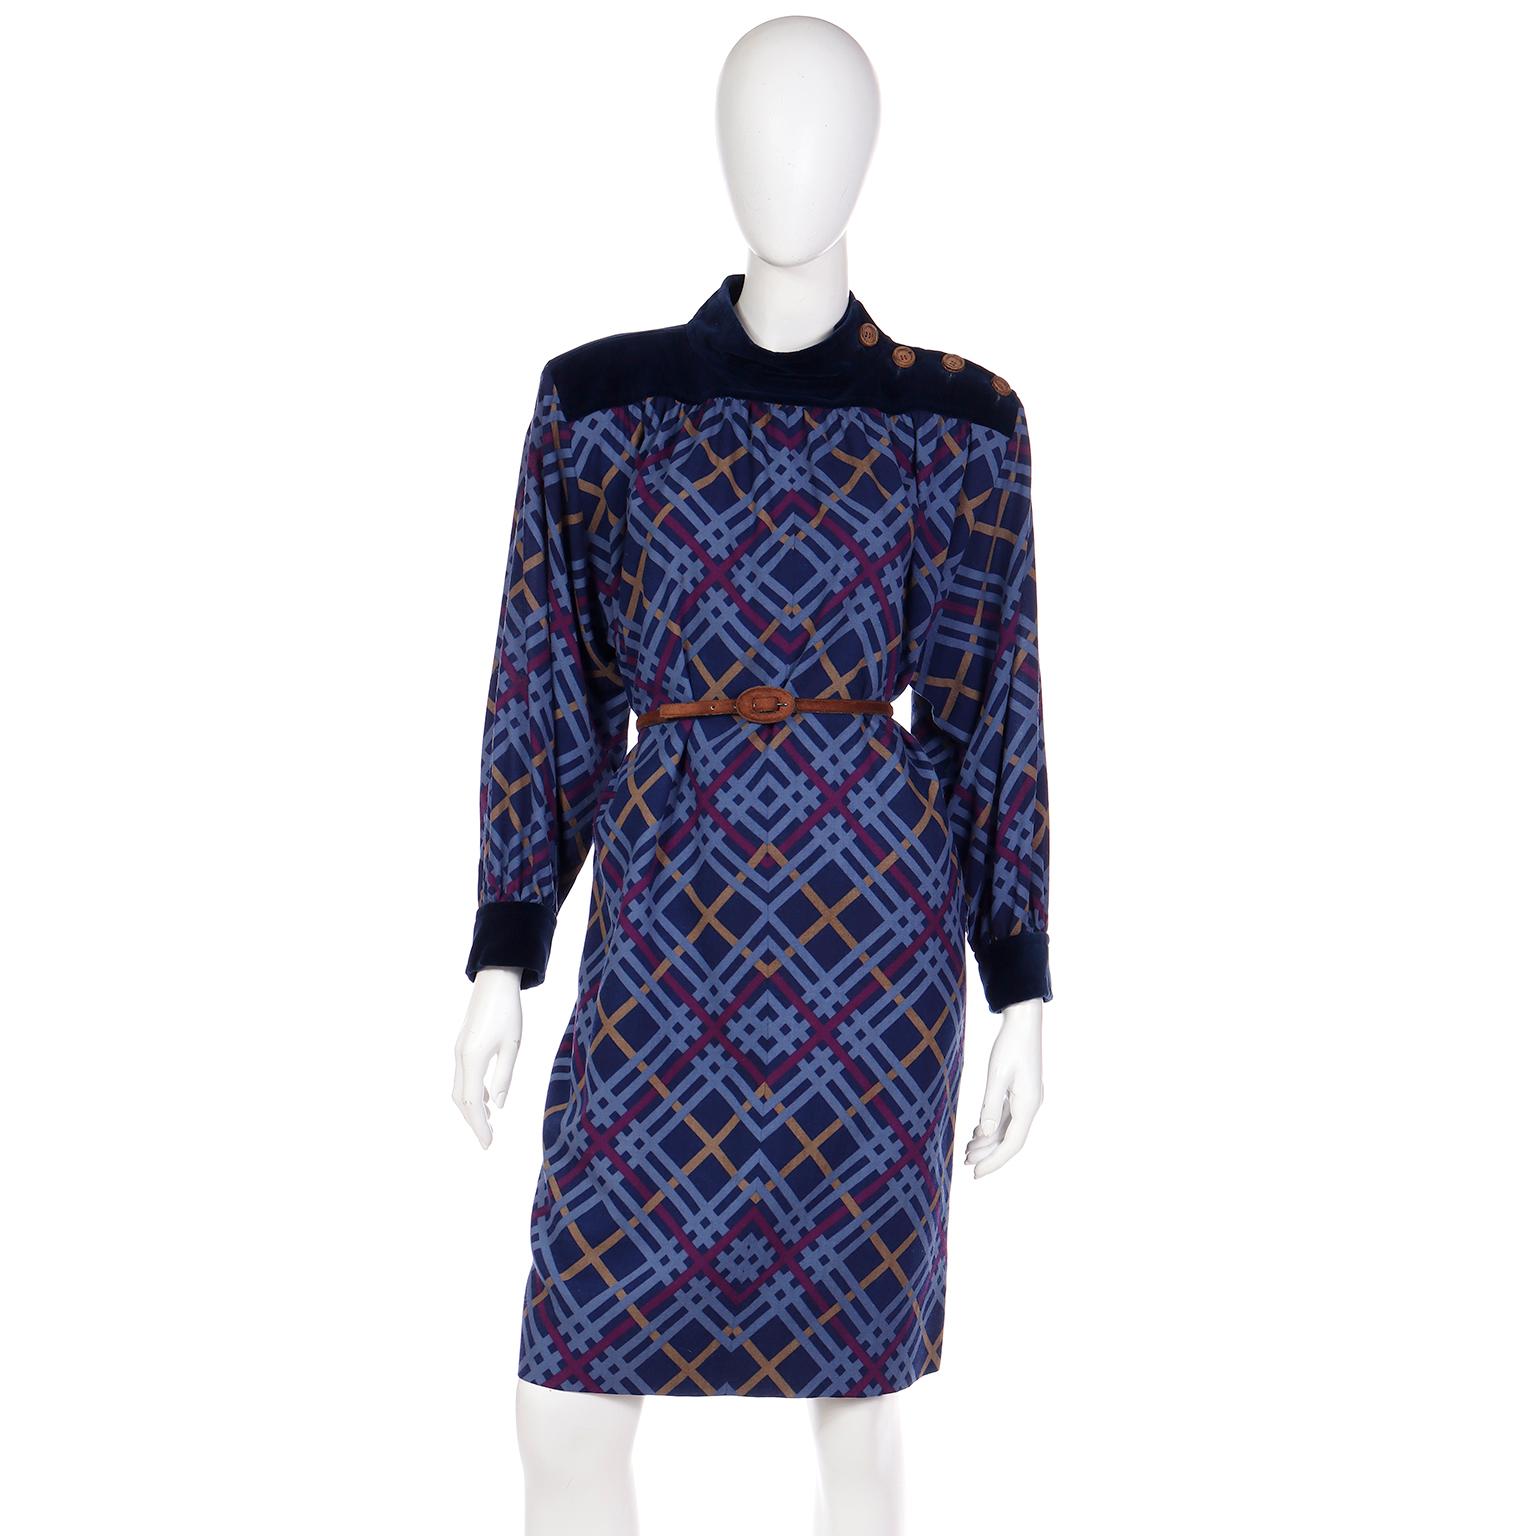 Yves Saint Laurent 1985 Blue Plaid Wool Challis Runway Dress In Excellent Condition For Sale In Portland, OR